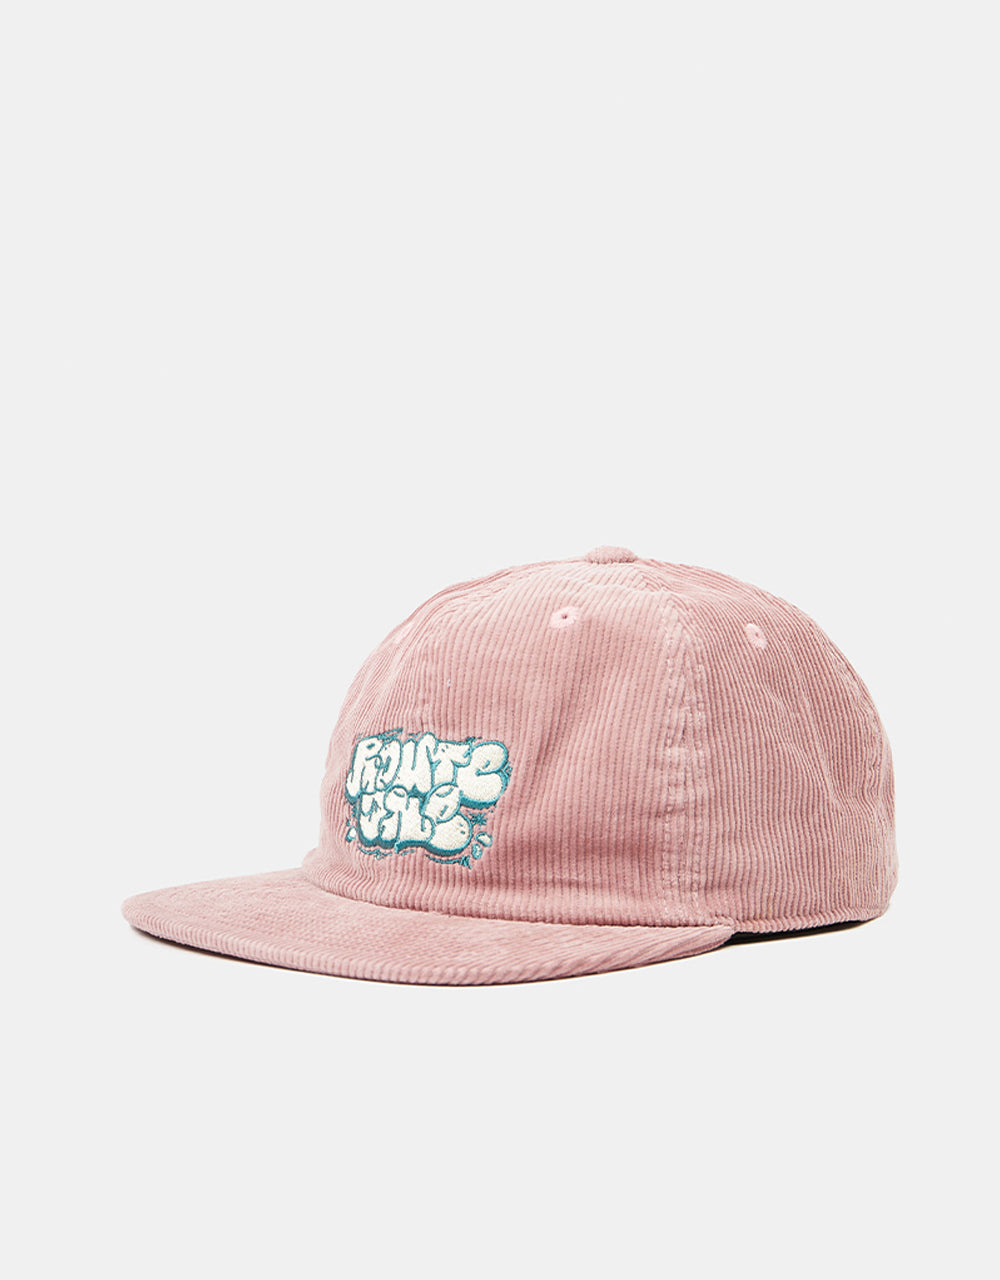 Route One Tag 2.0 Cord 6 Panel Cap - Dusty Pink